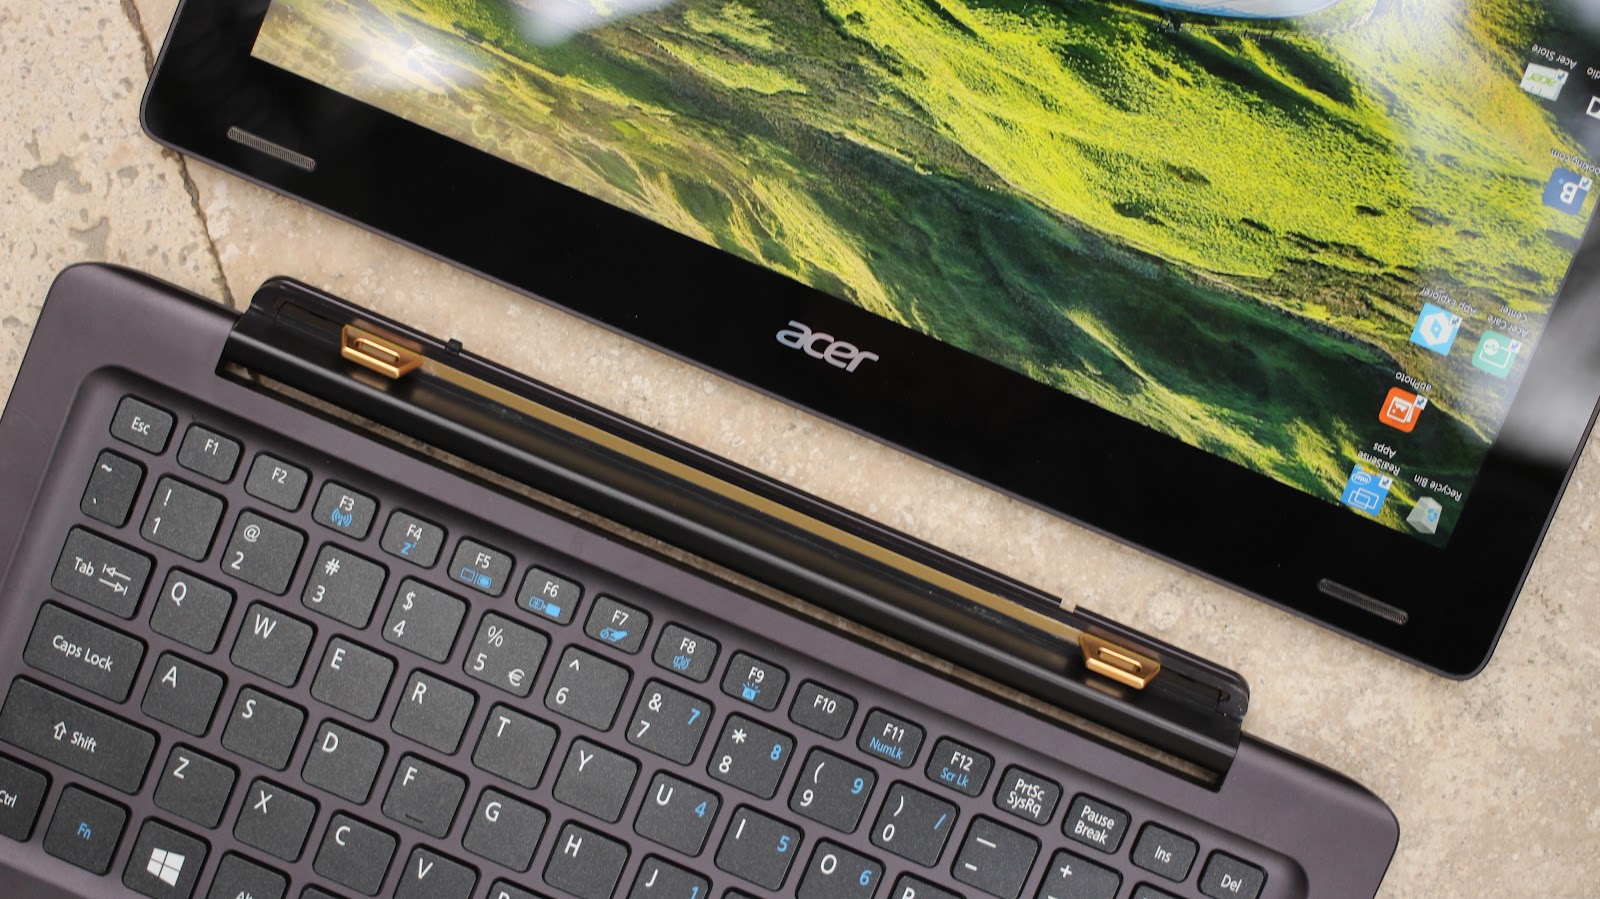 This image shows the Acer laptop in convertible shape. The display and keyboard is separated to each other.